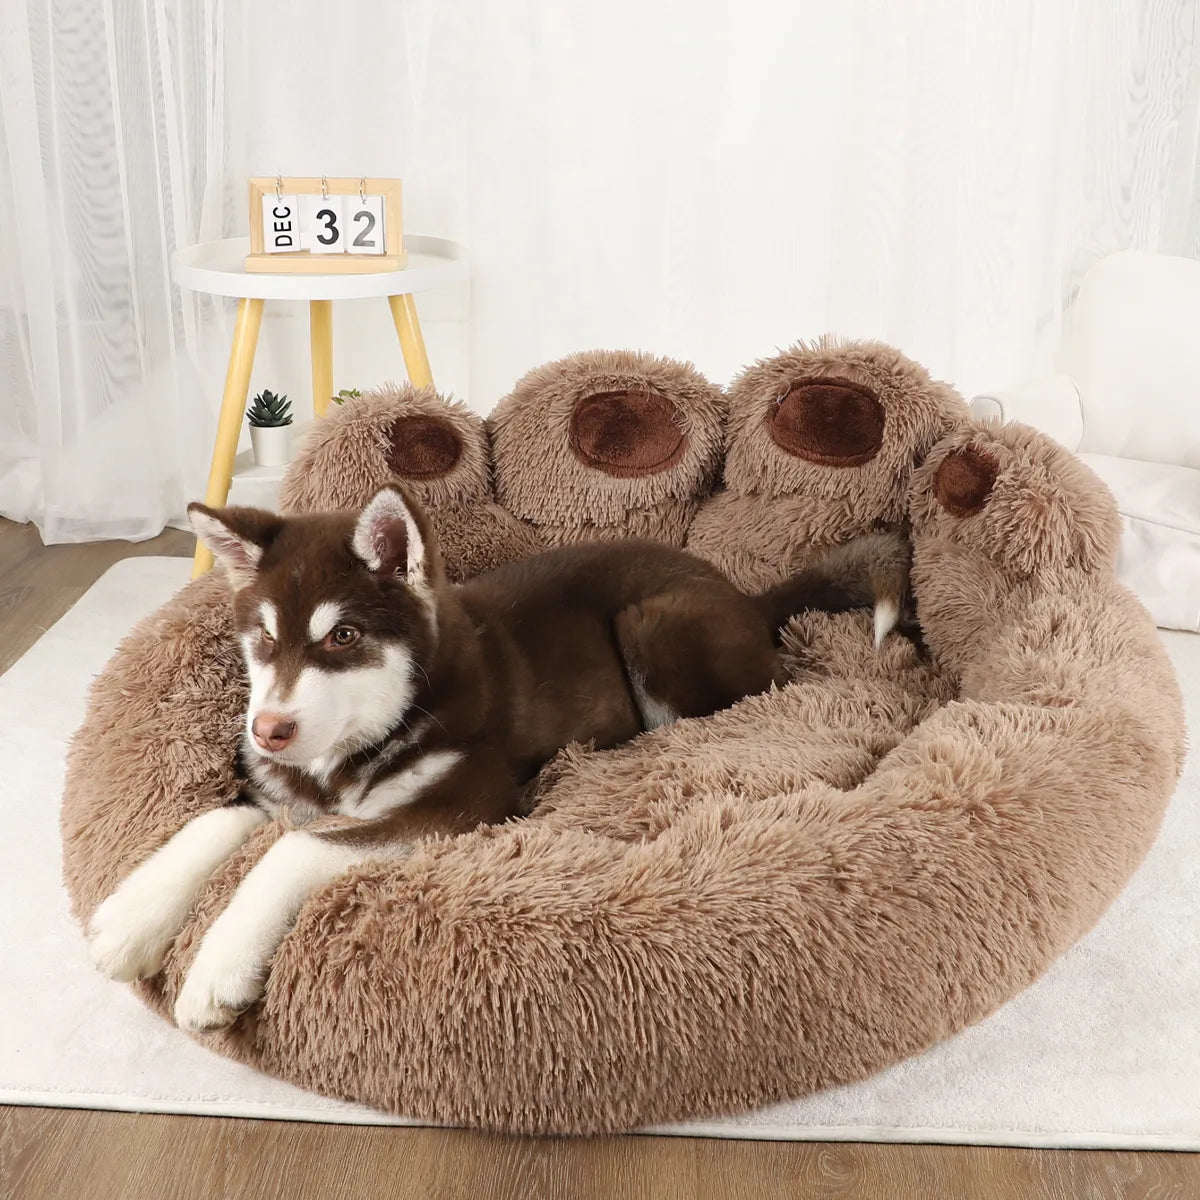 Washable plush sofa bed for 50cm dogs and cats - 3 colors